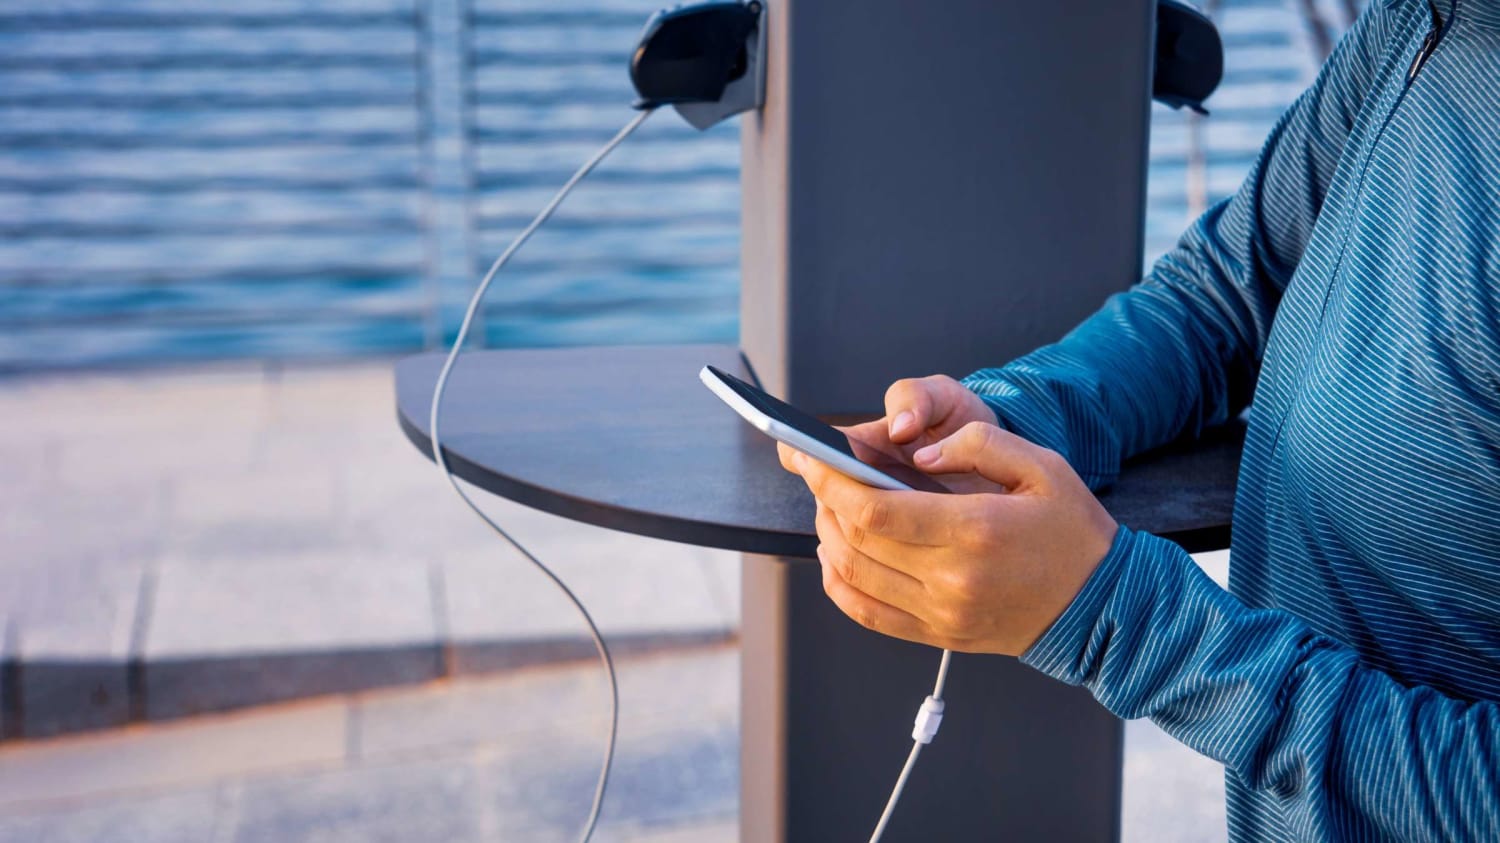 Why You Should Never Charge Your Phone in Public USB Ports Without a USB Data Blocker